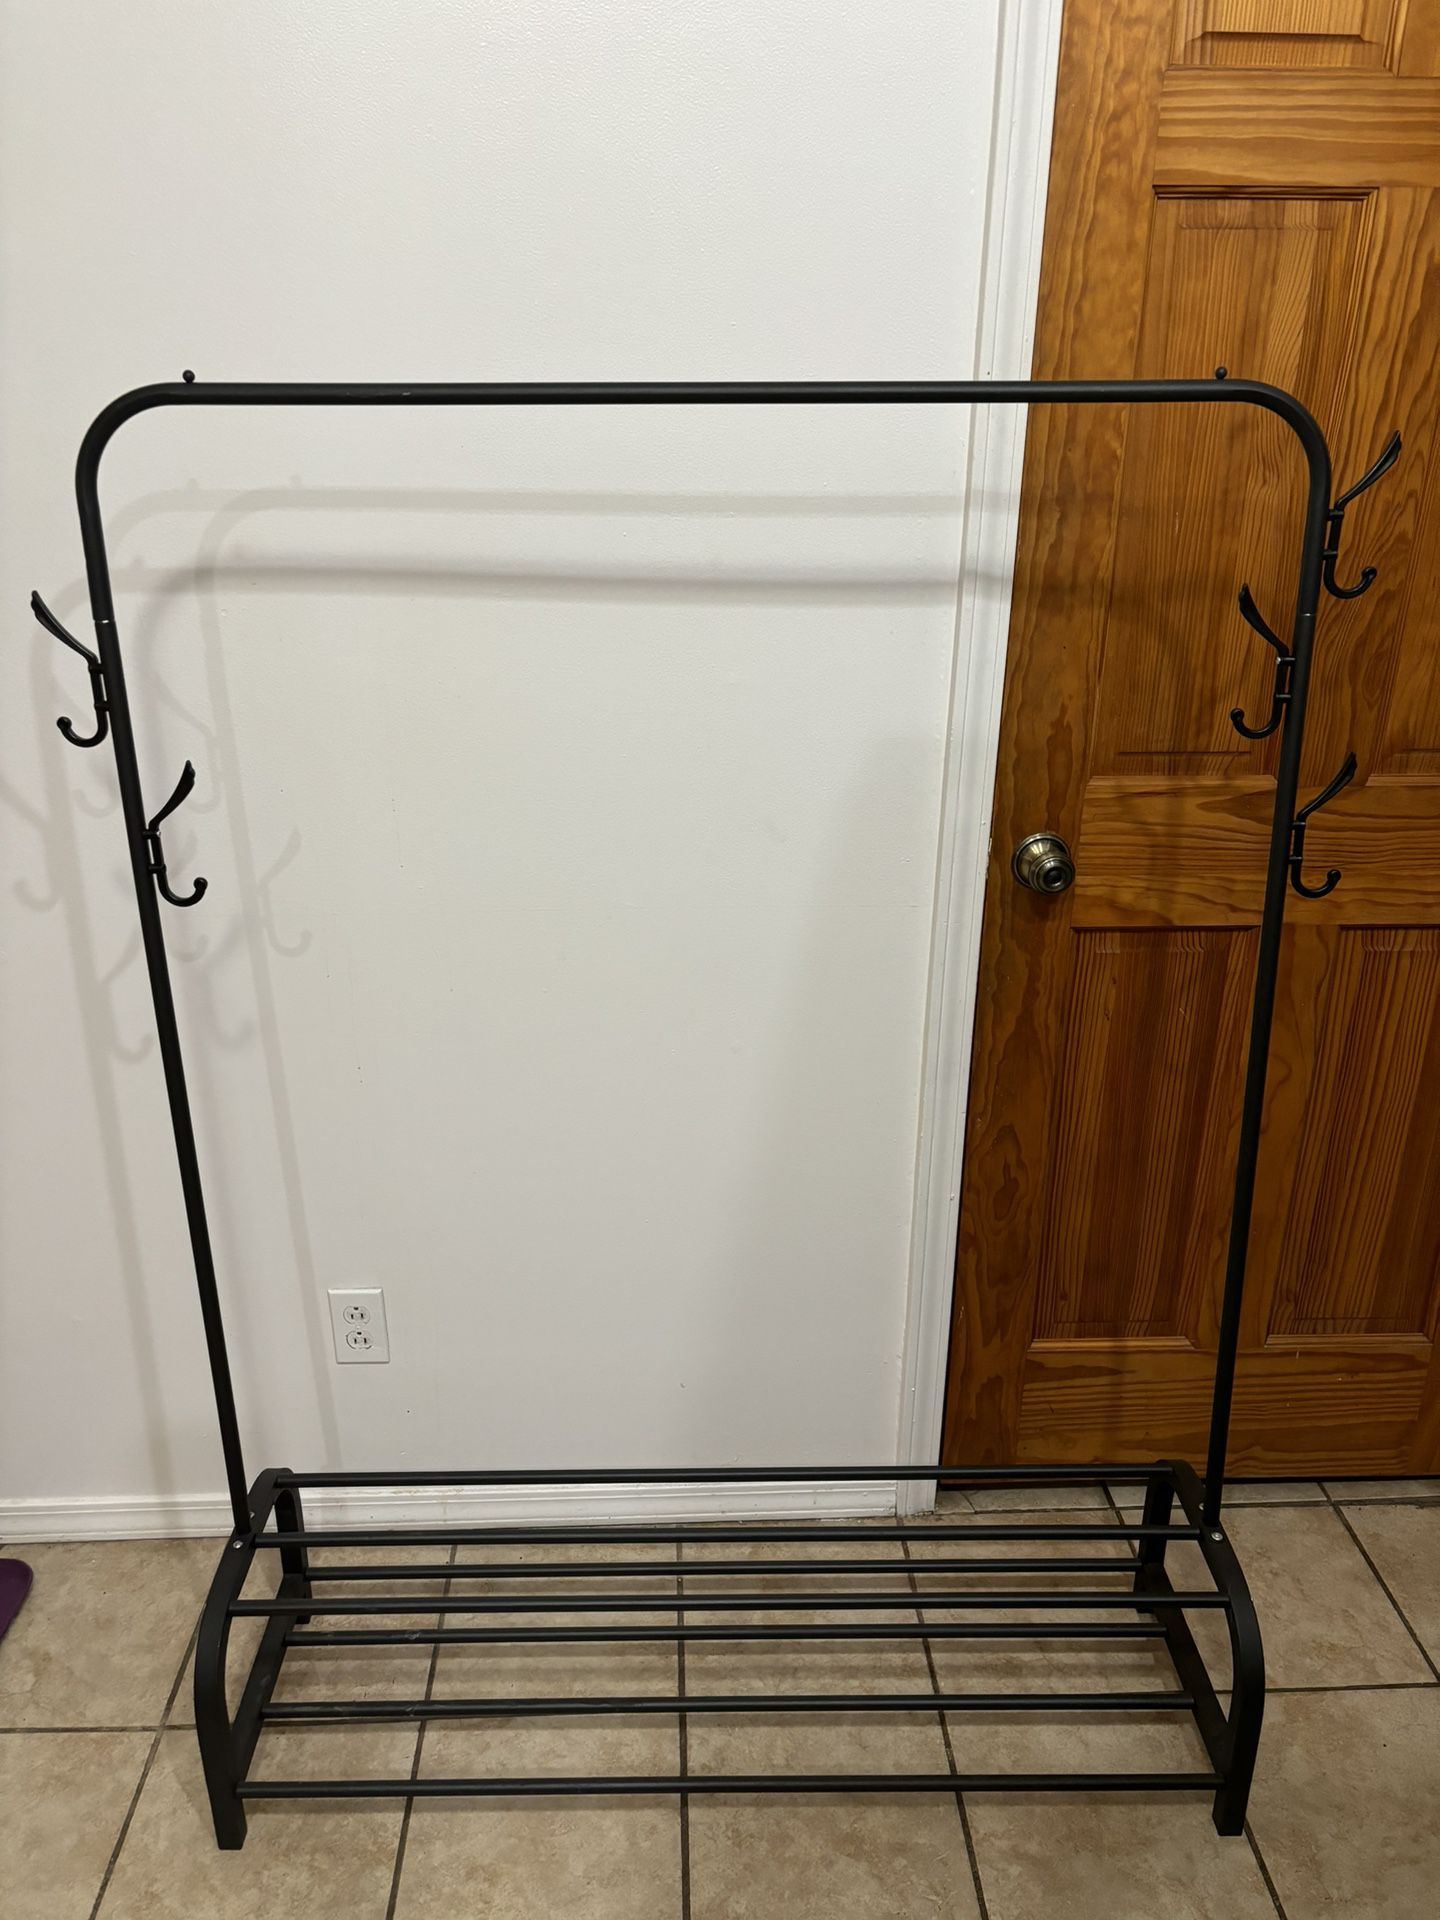 Free Clothes rack